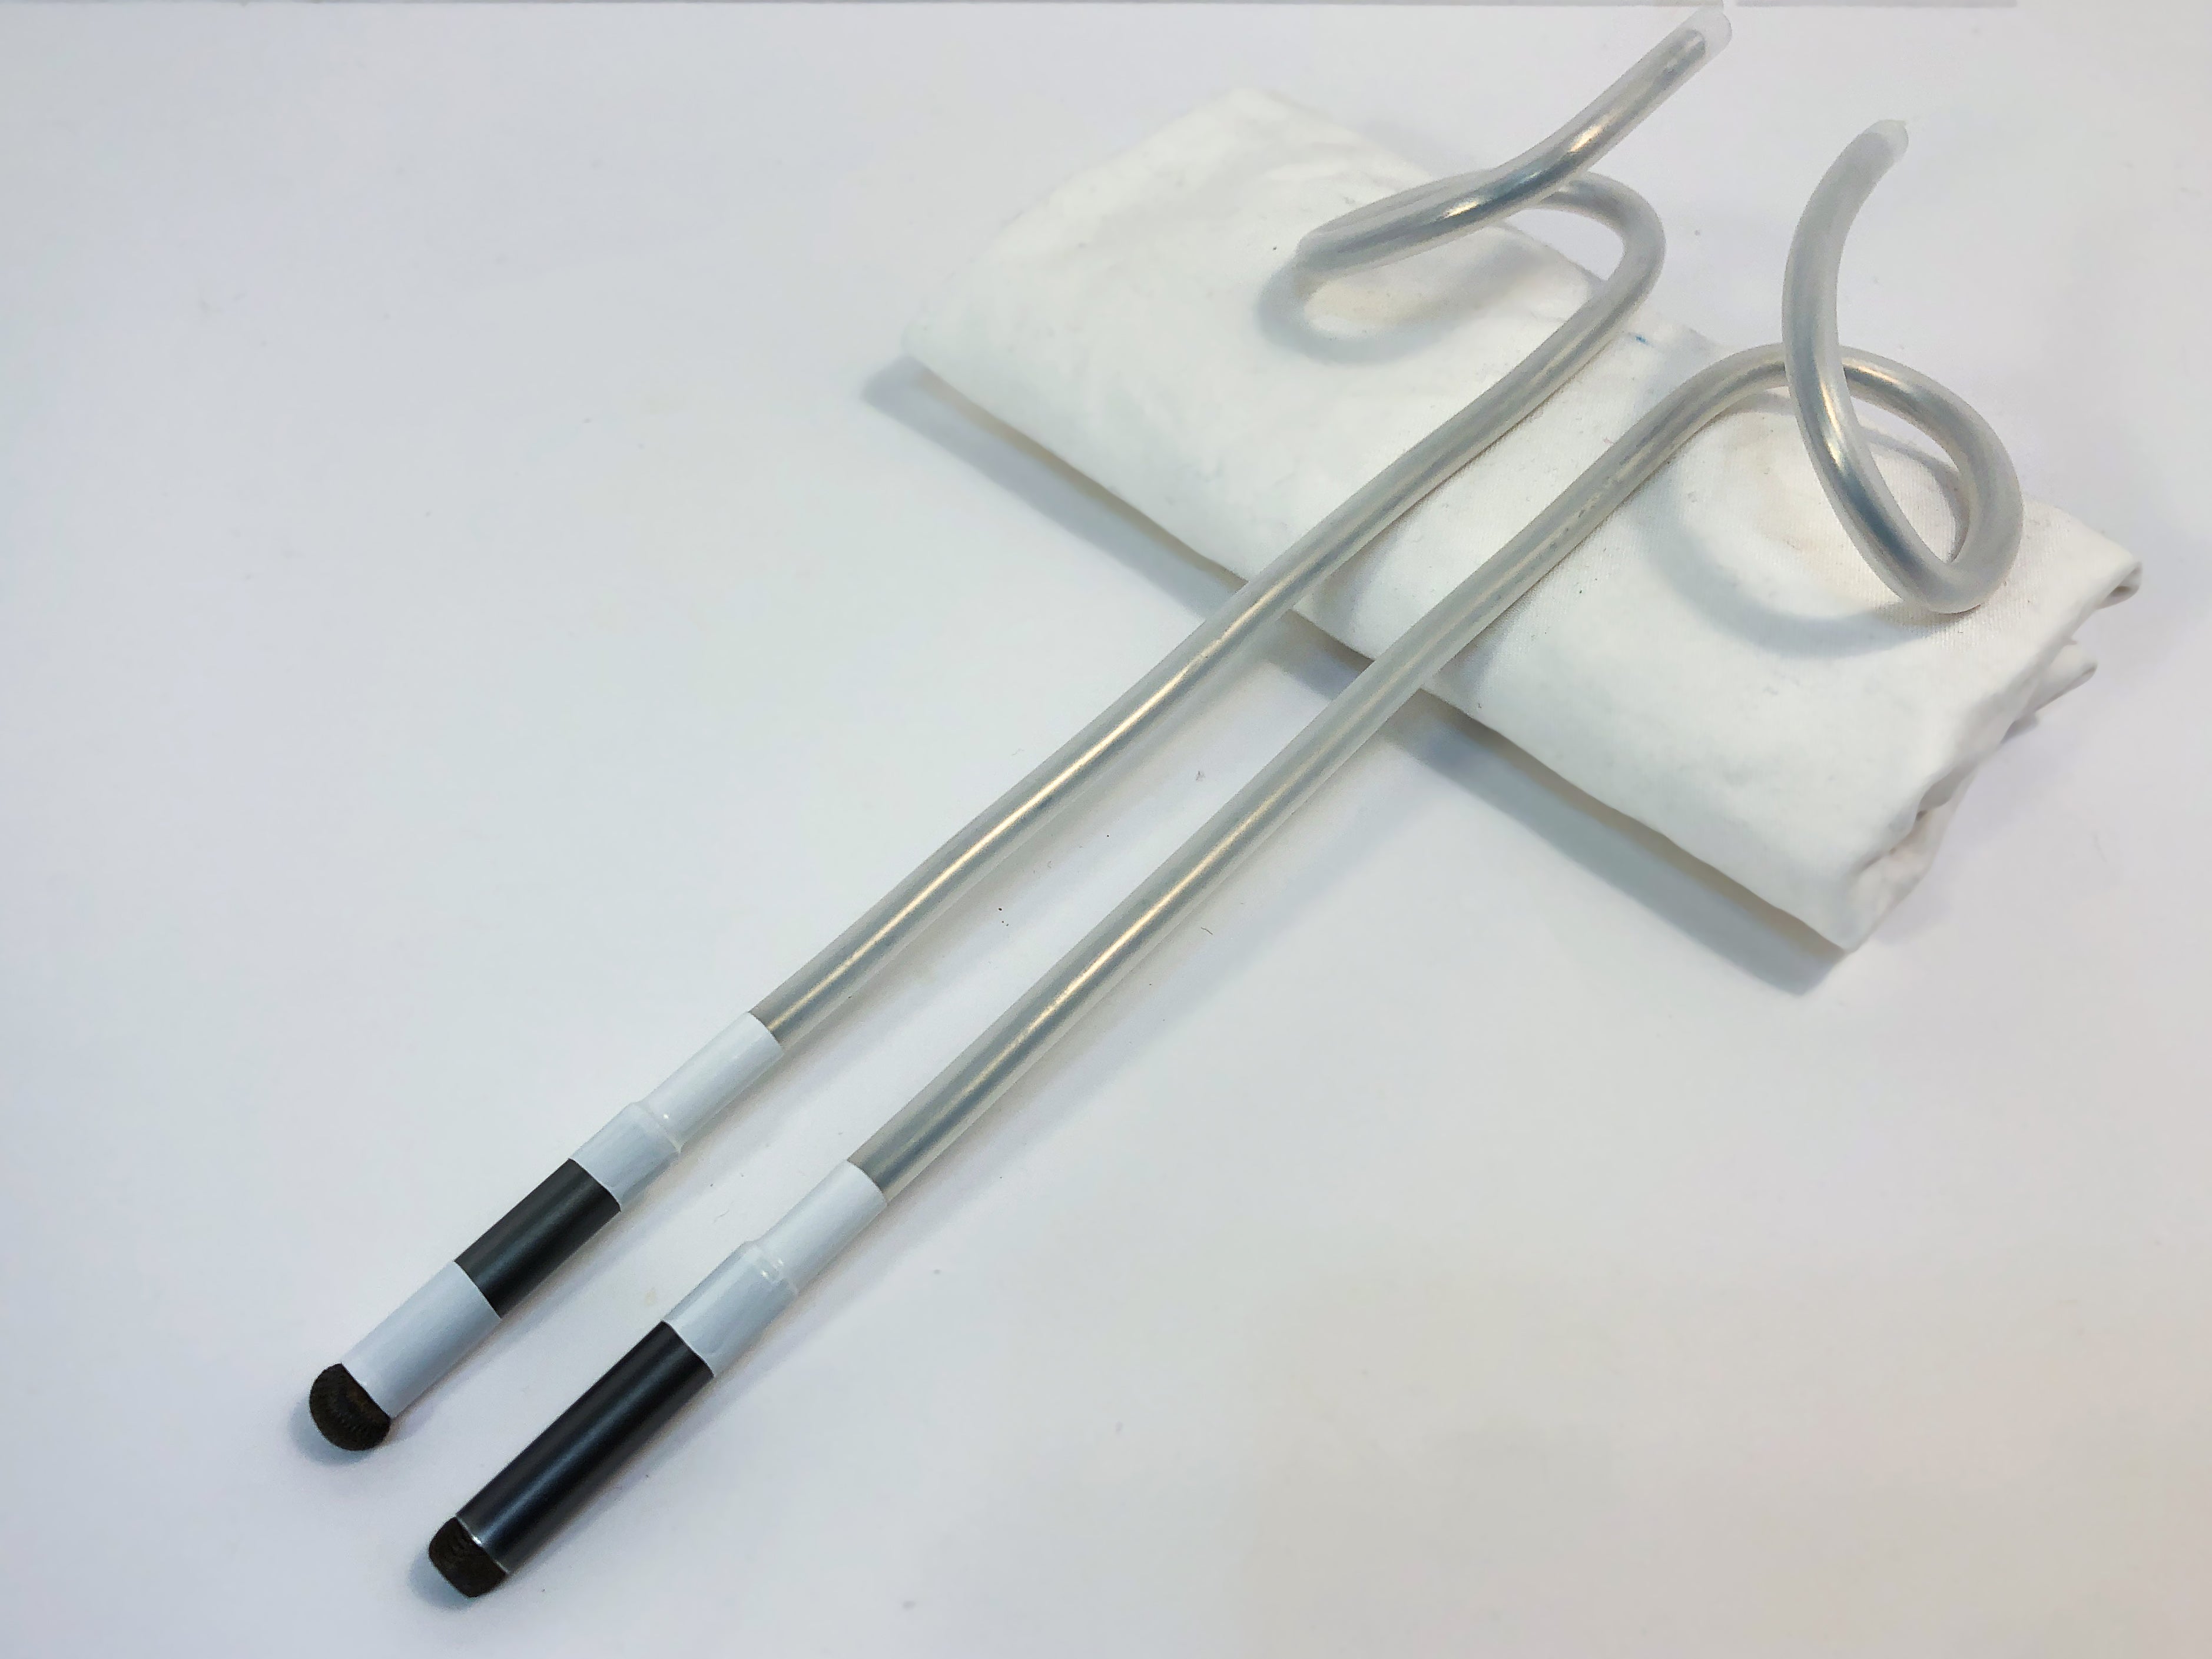 an image to two bendable styluses. One has a flat head (the basic style) and one has a round head (the SALT style).